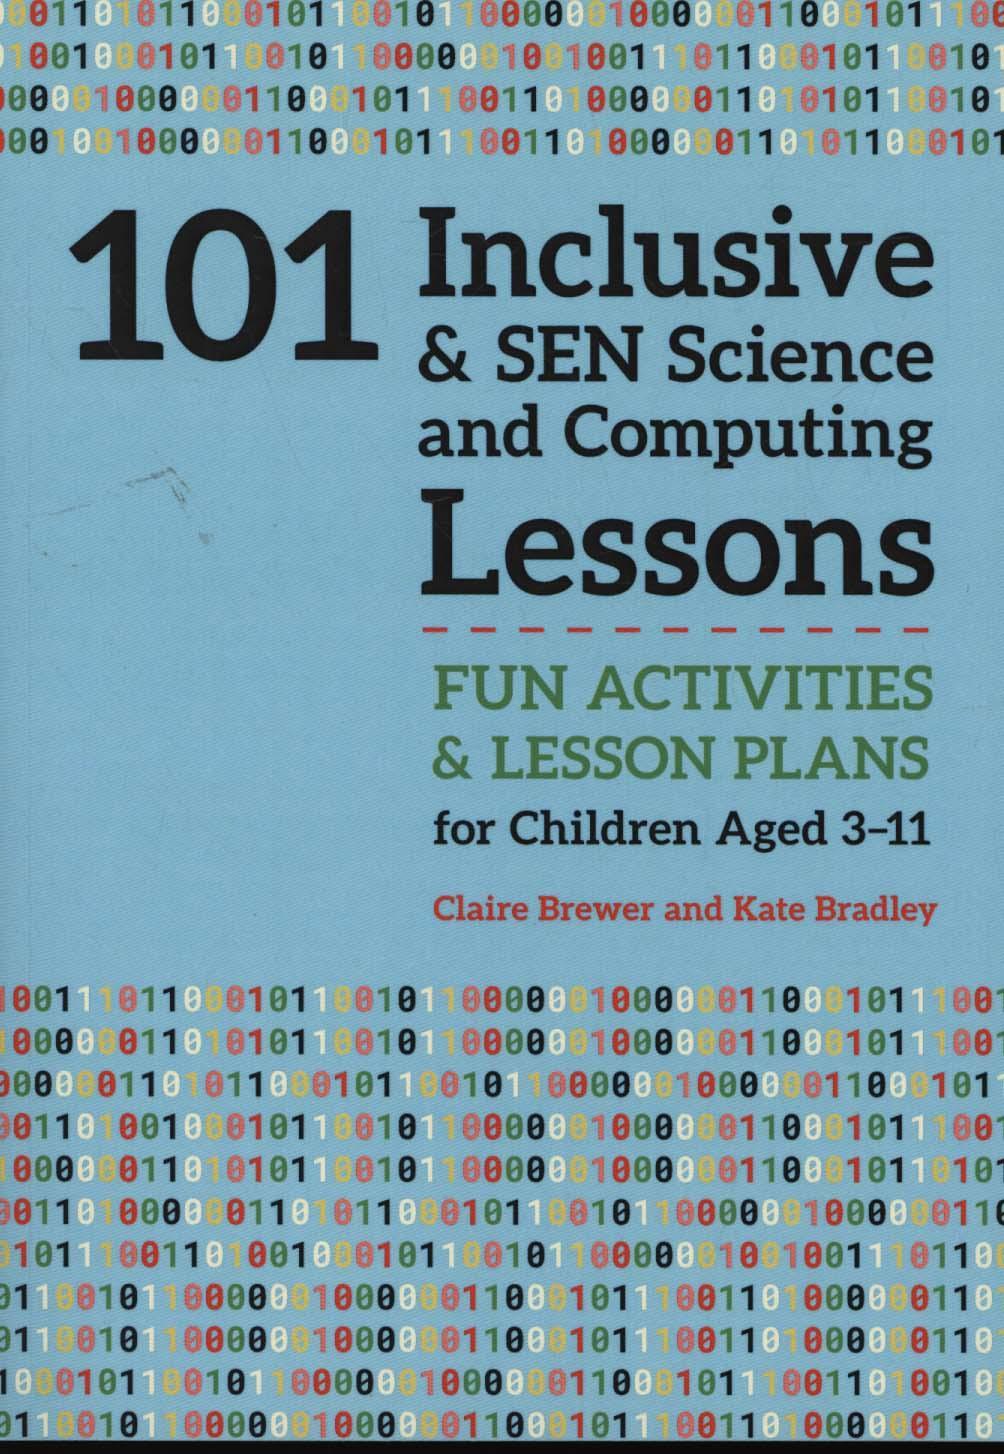 101 Inclusive and SEN Science and Computing Lessons - Claire Brewer